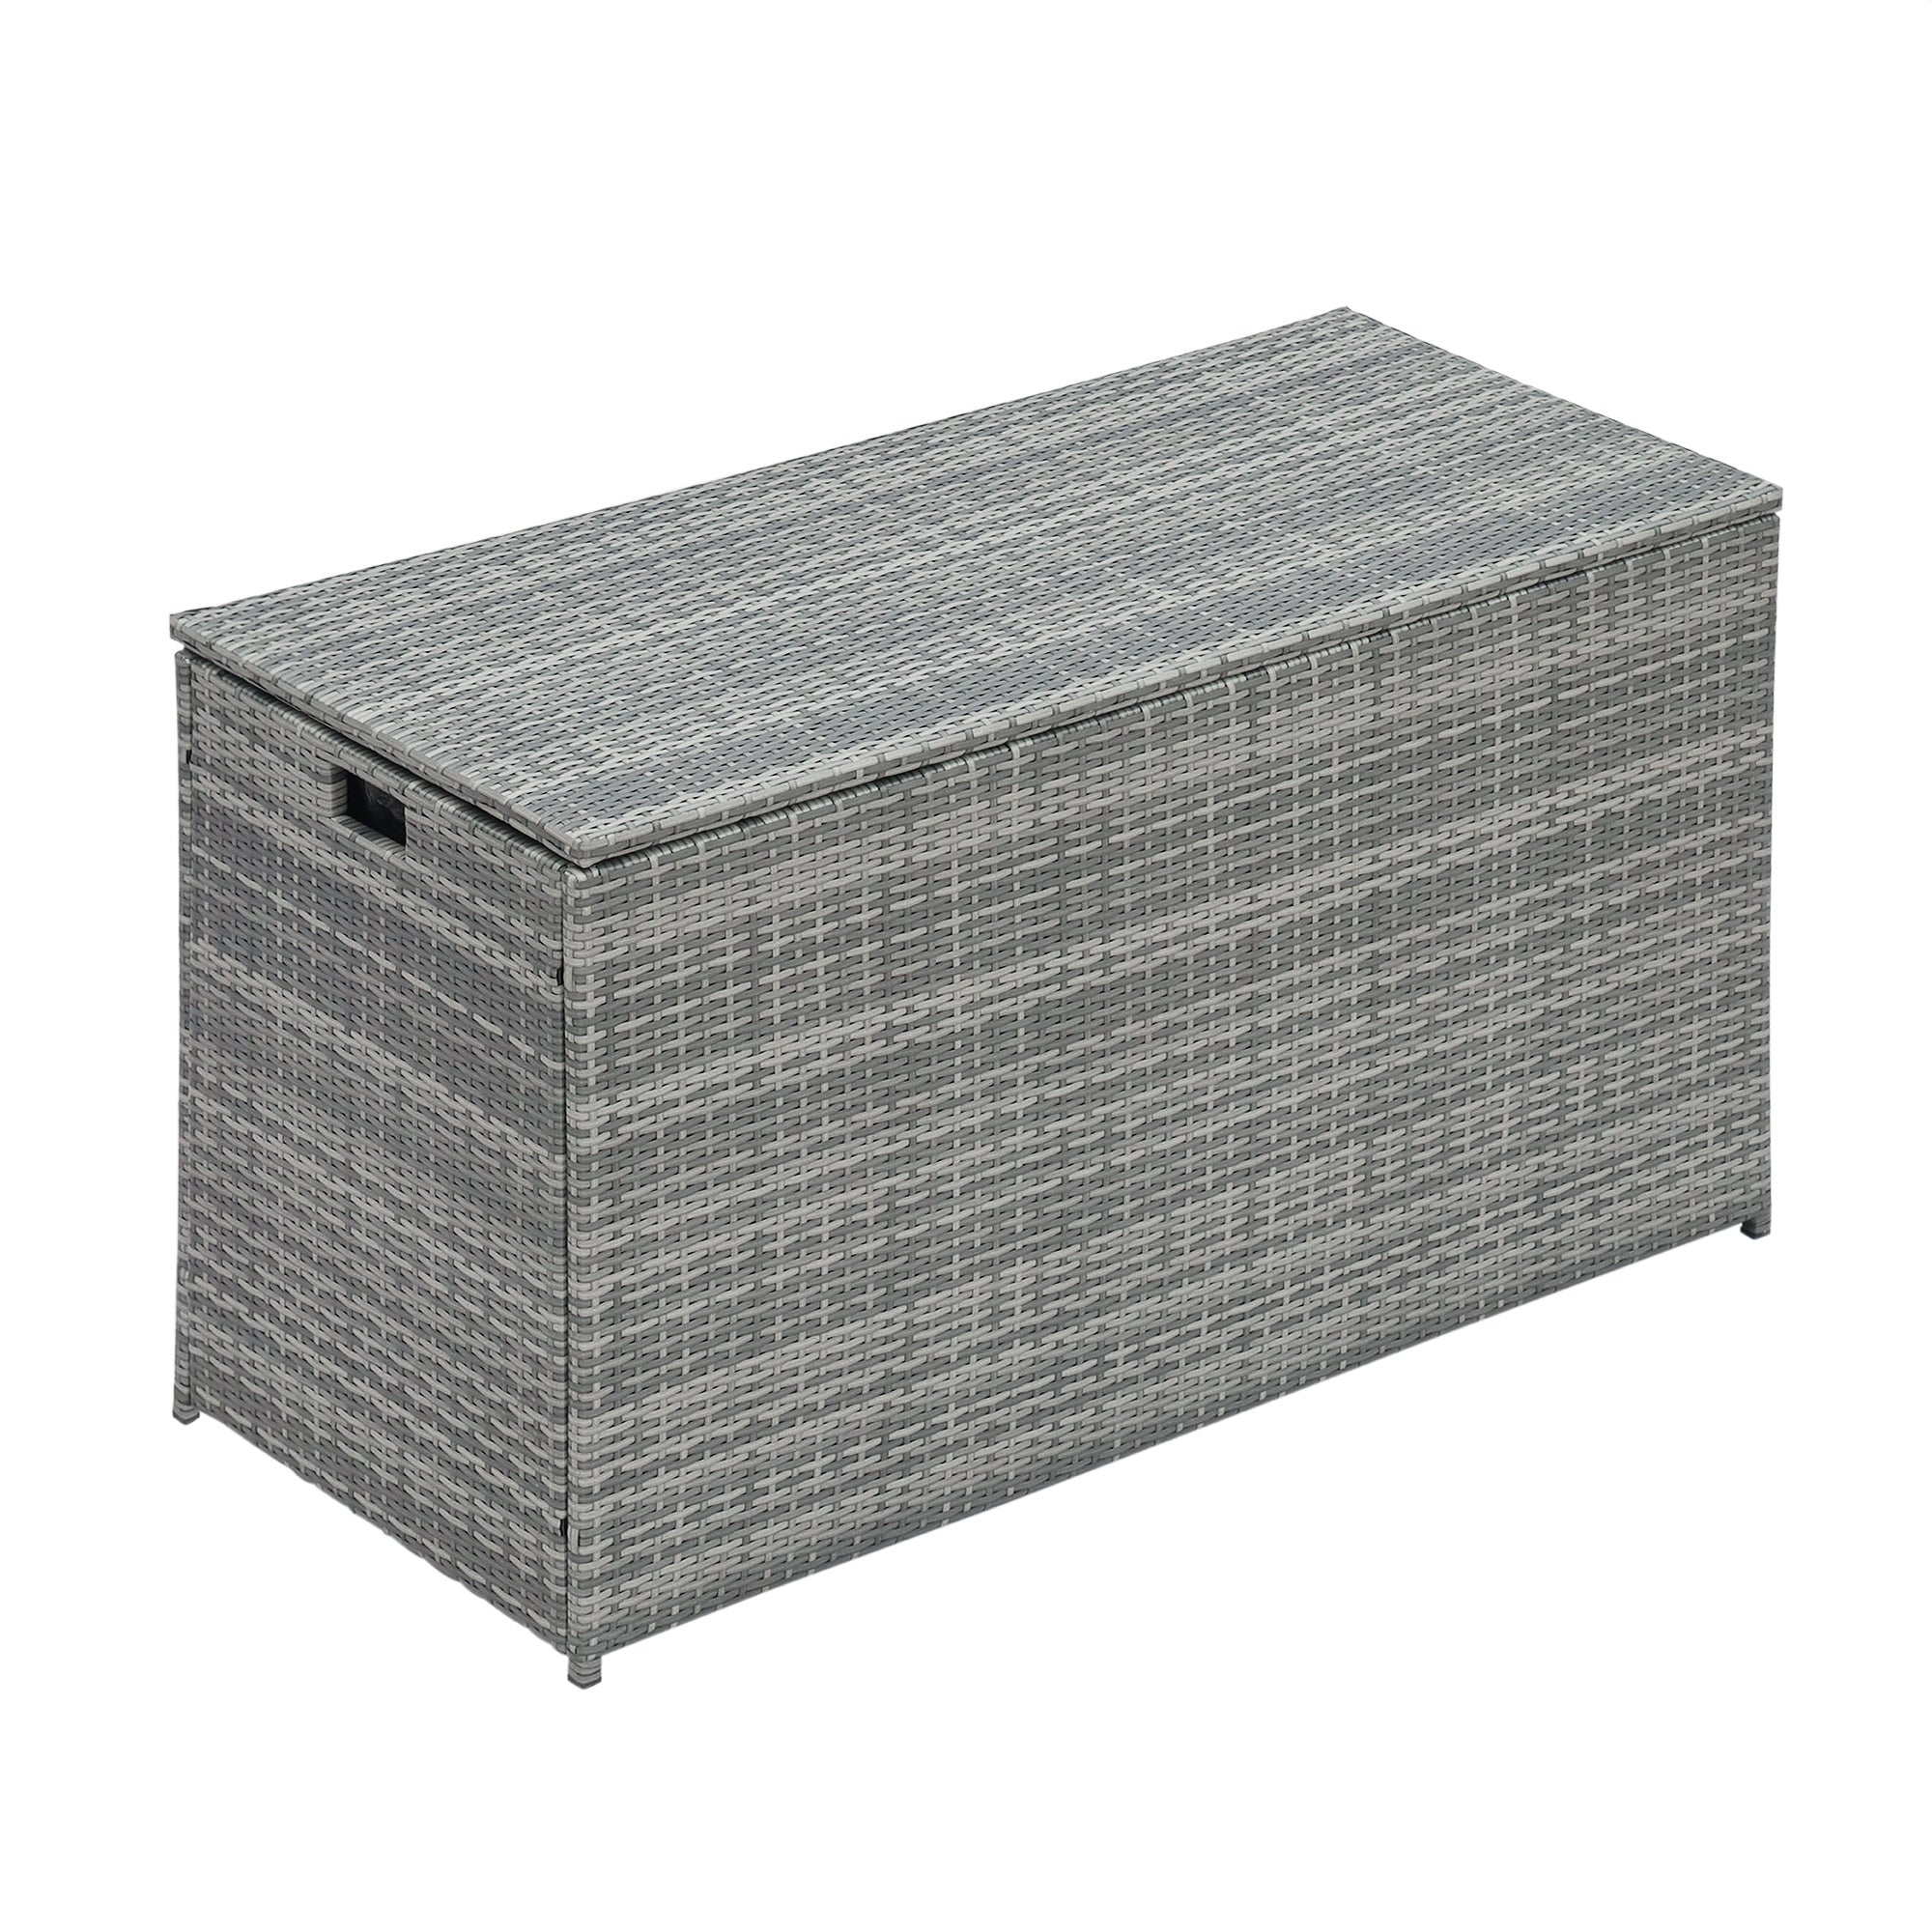 Teamson Home Wicker 154 Gallon Outdoor Deck Box for Cushions or Pool Accessory Storage, Gray